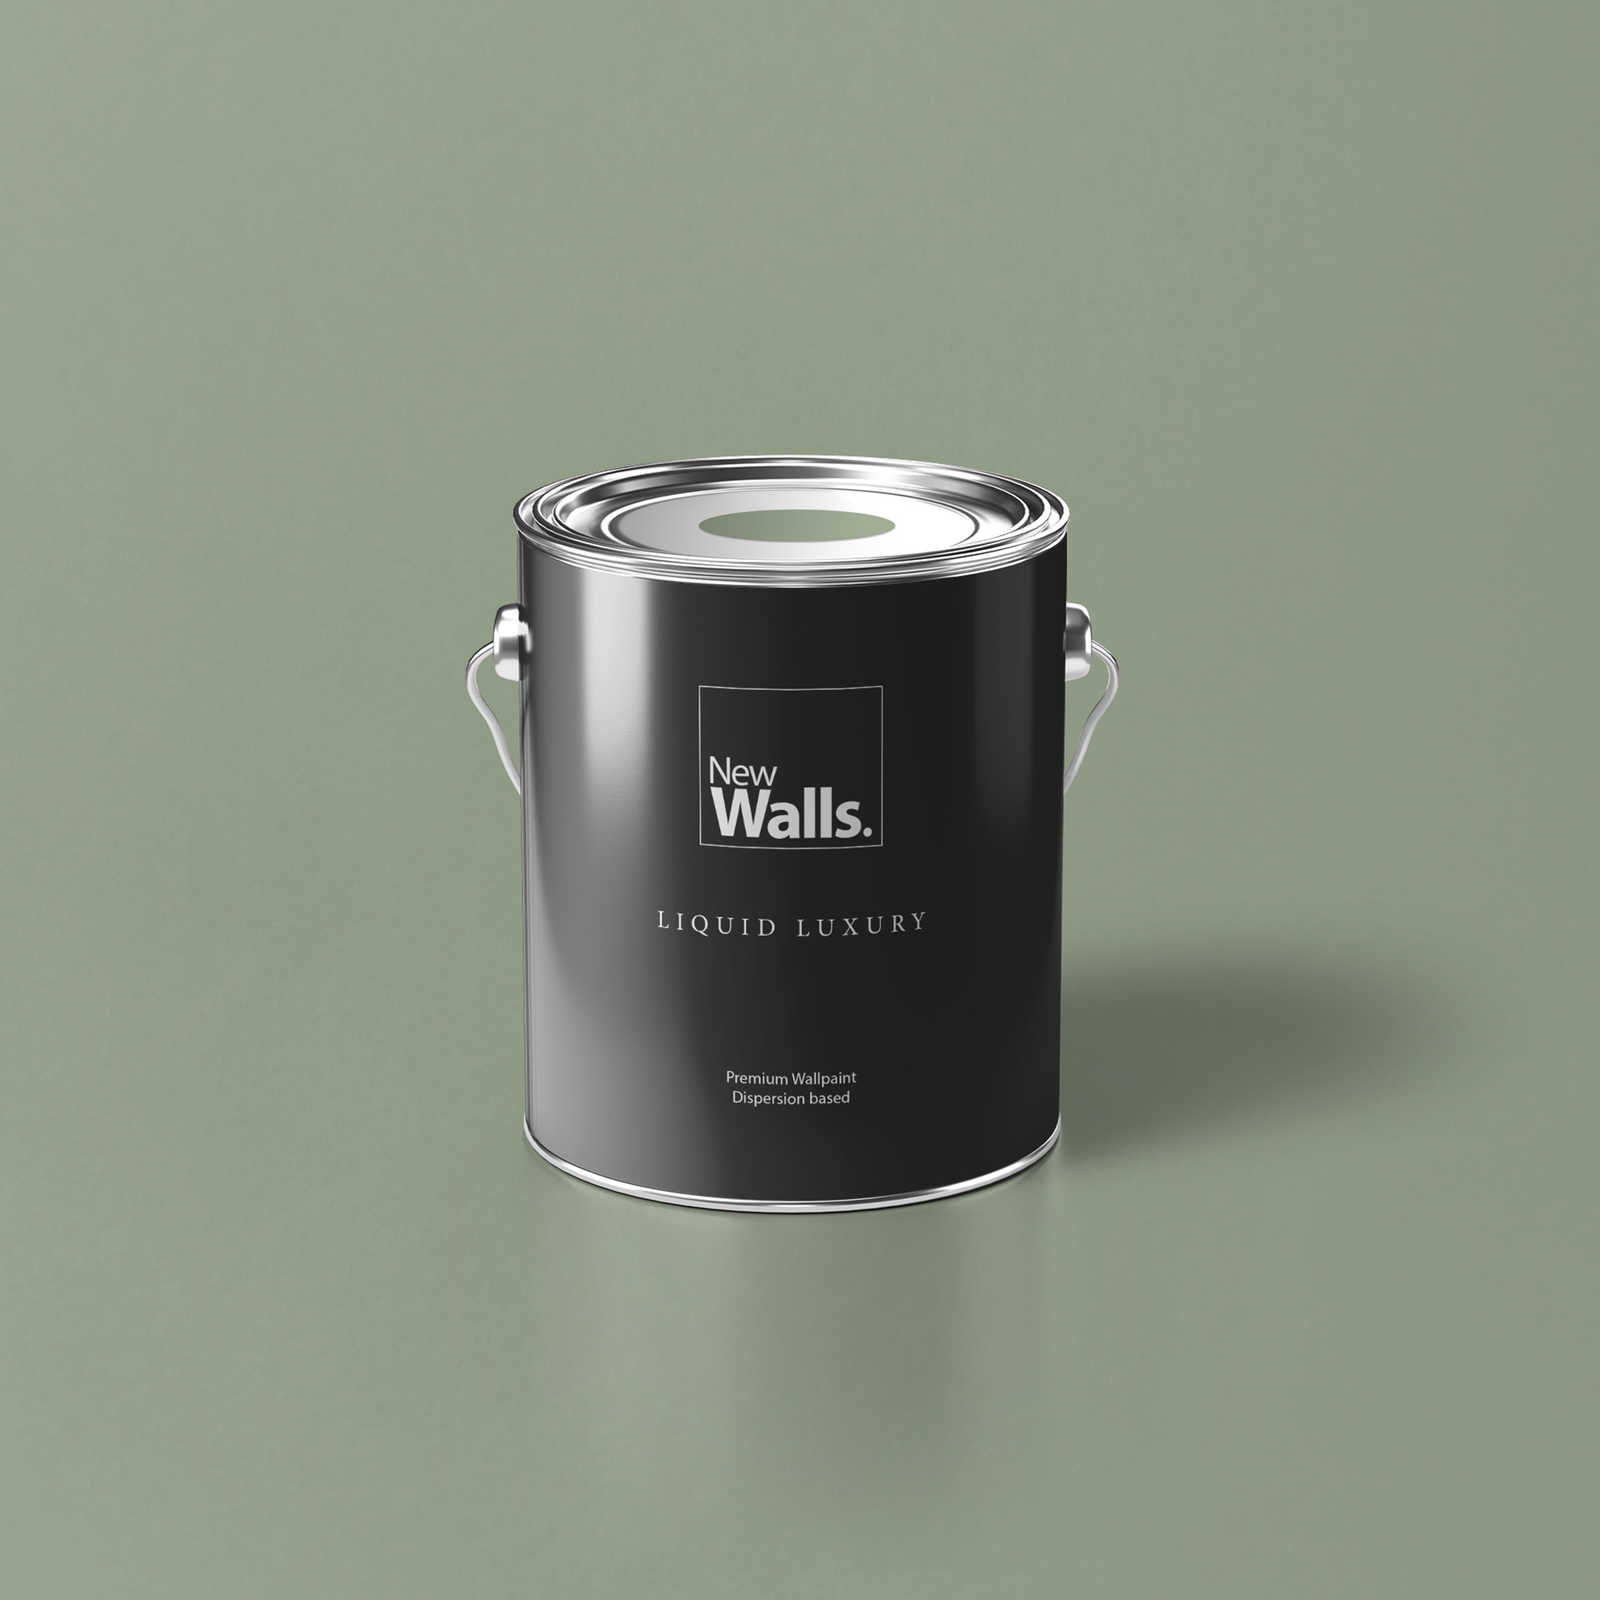 Premium Wall Paint Earthy Olive Green »Gorgeous Green« NW502 – 2.5 litre
